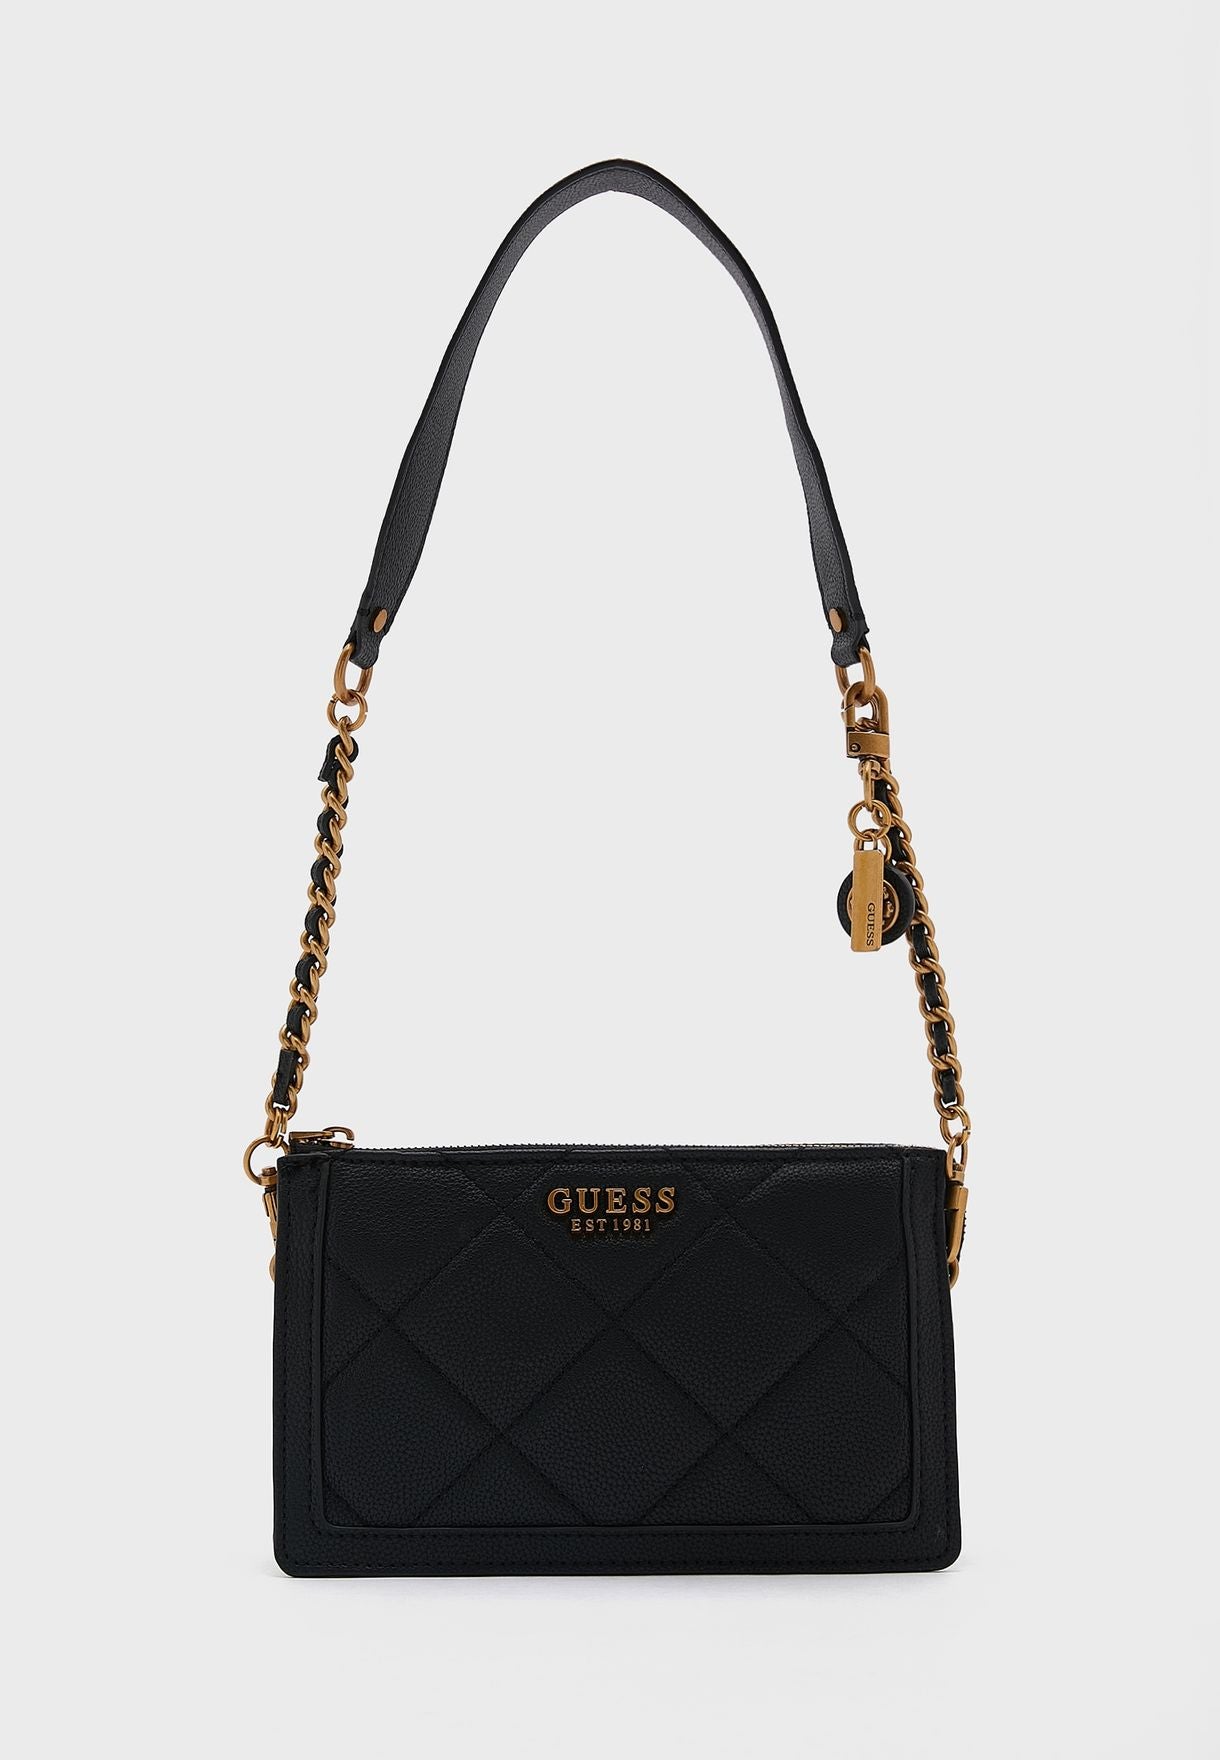 GUESS Abey Multi Compartment Cross Body Bag